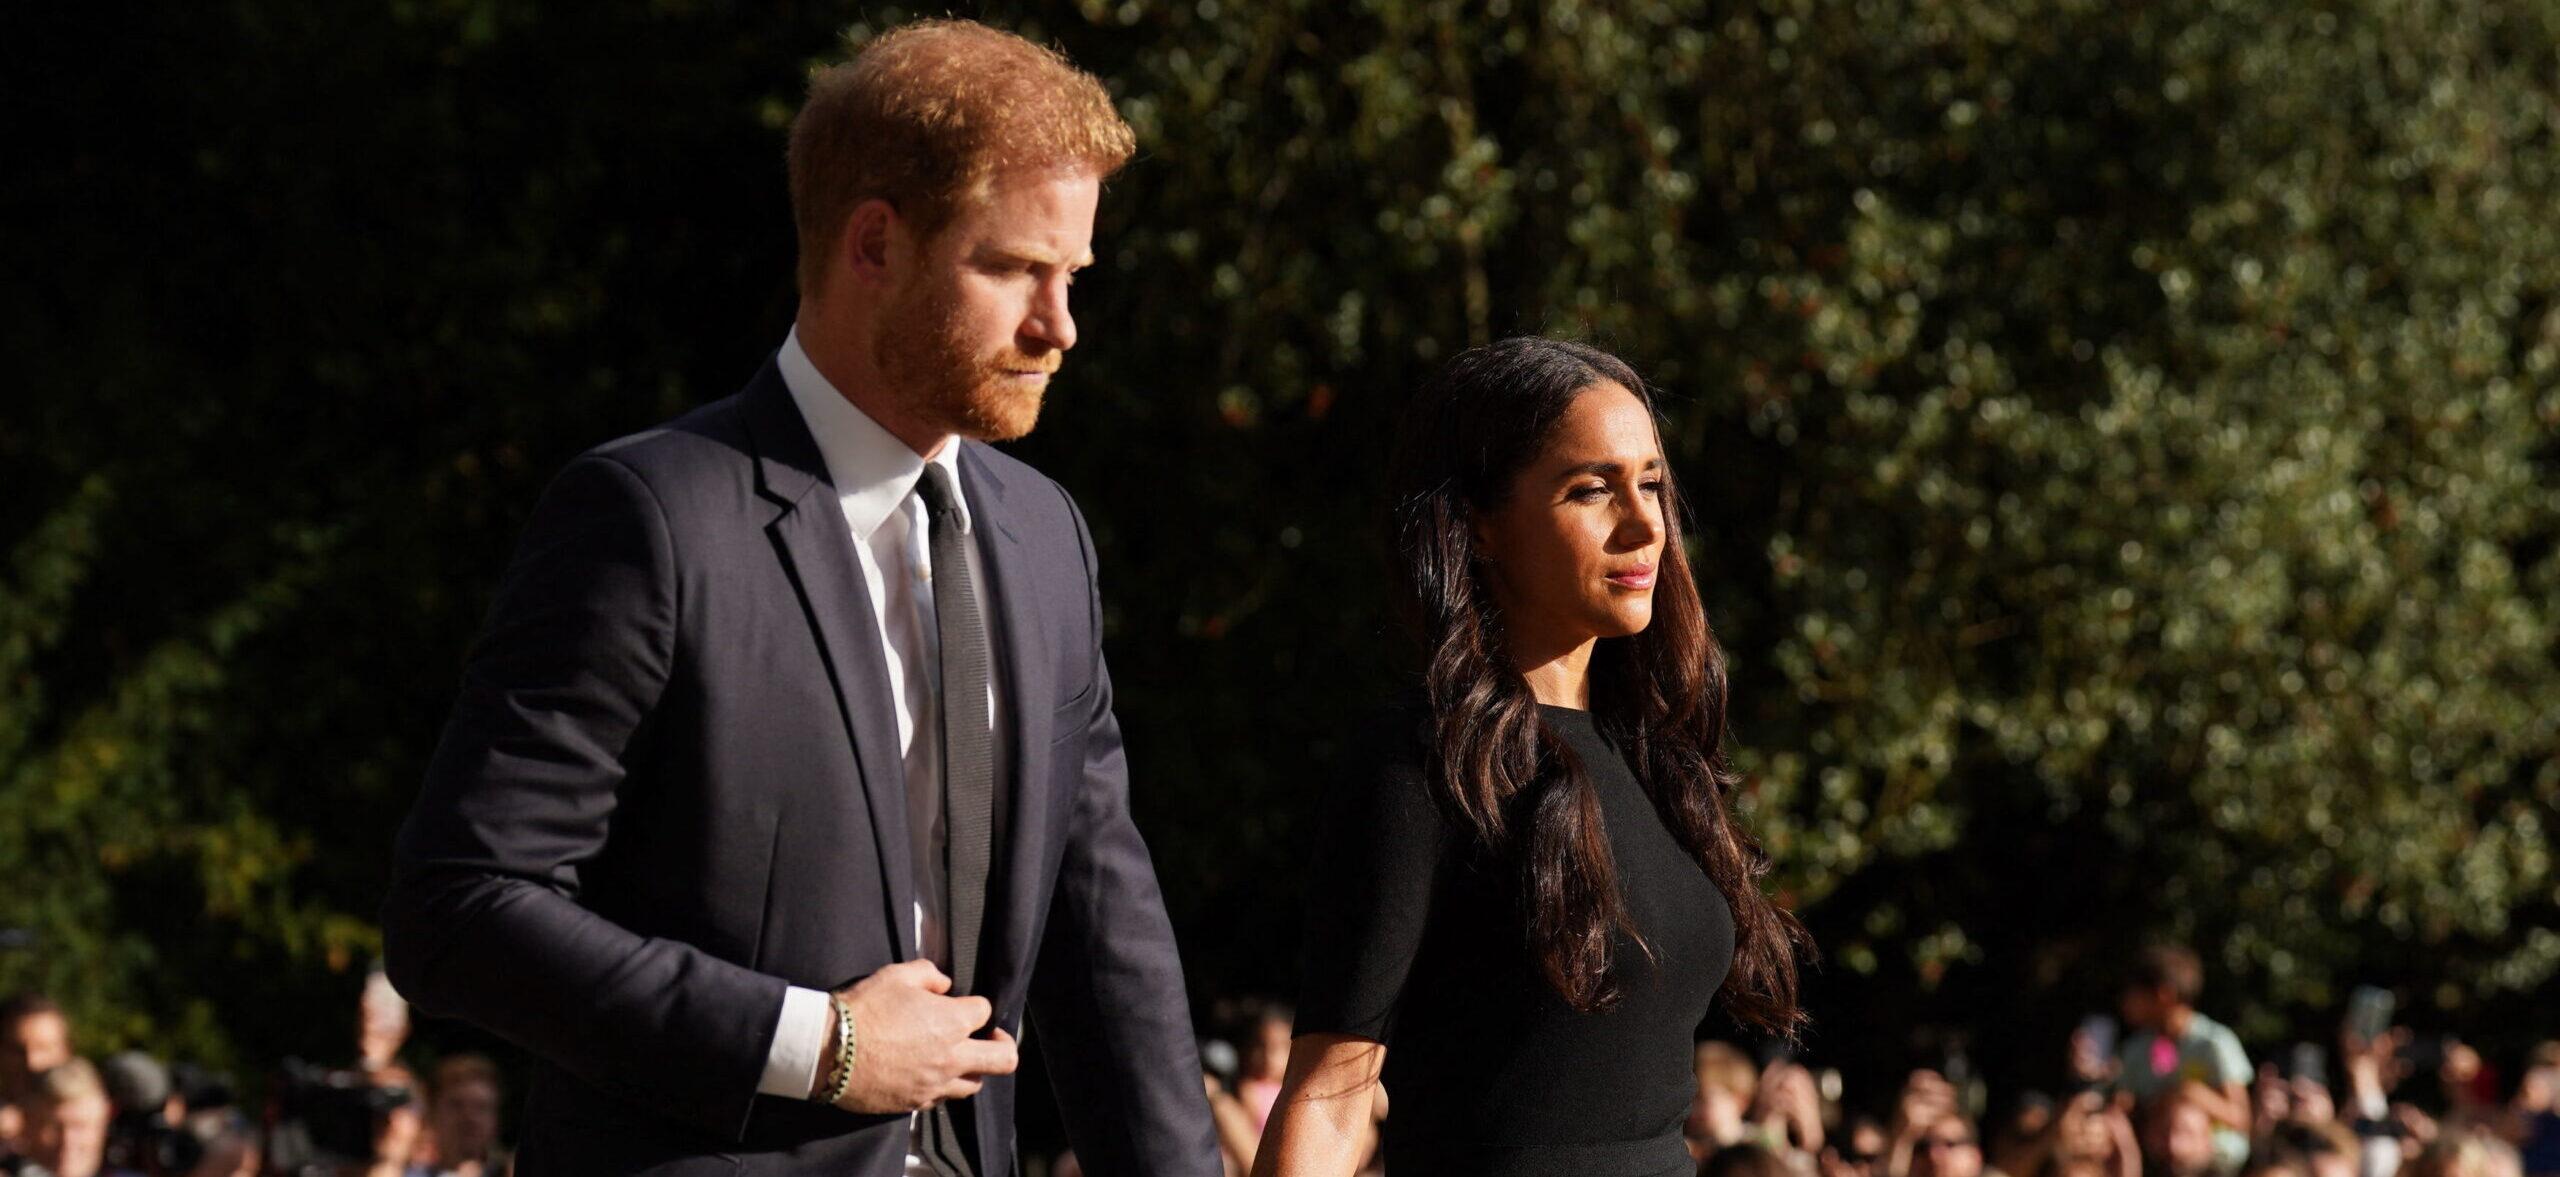 Prince Harry & Meghan Markle Were Reportedly DENIED A Ride On Air Force One After The Queen's Funeral